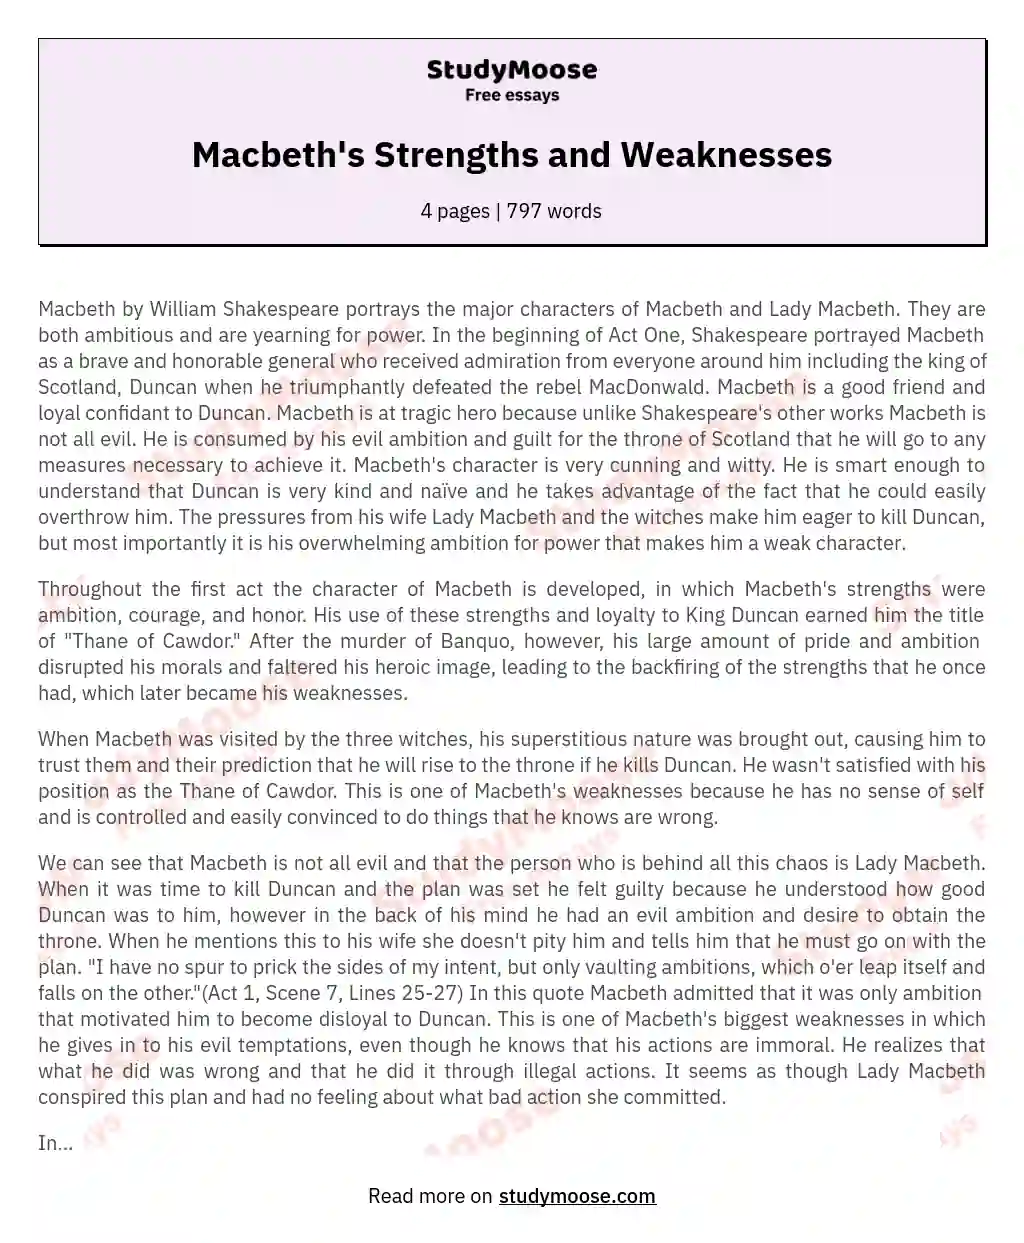 Macbeth's Strengths and Weaknesses essay